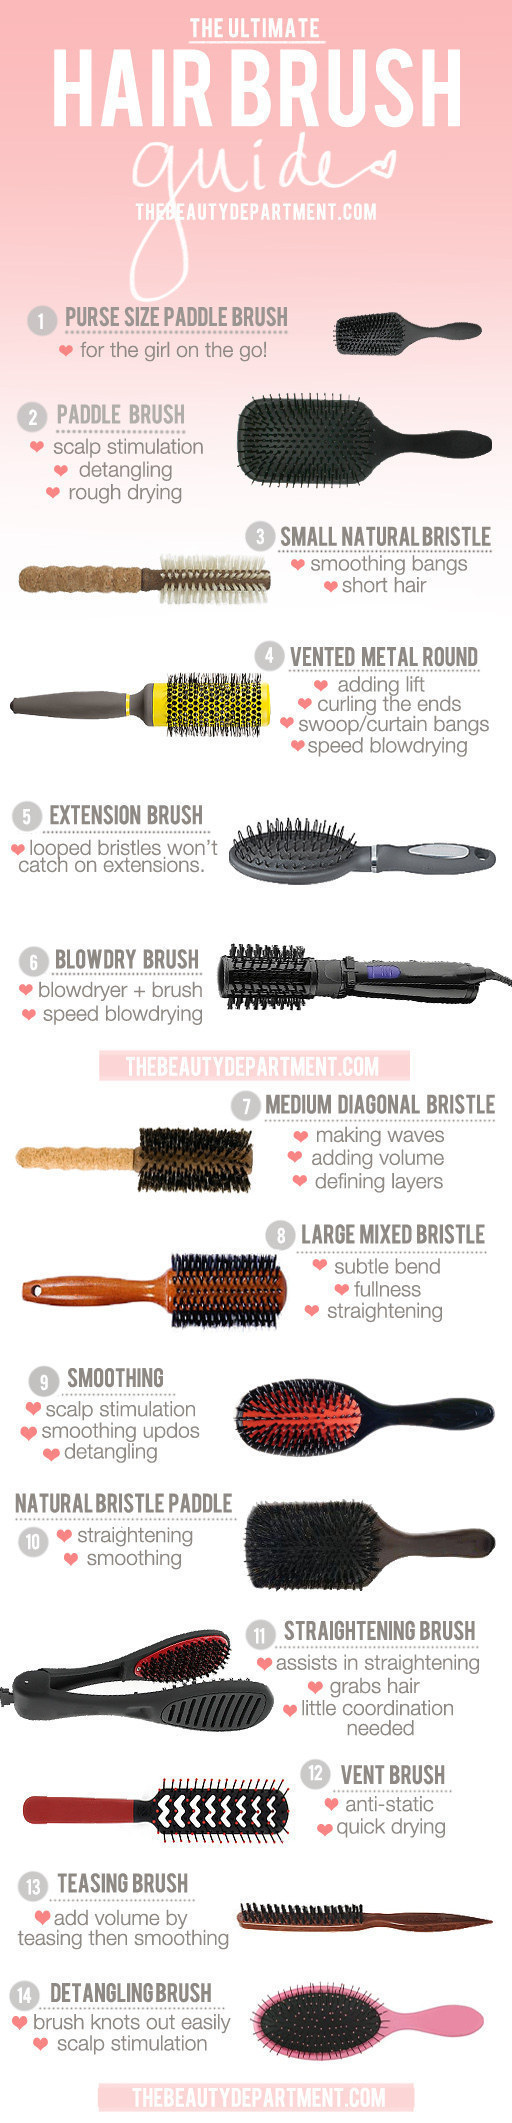 Make sure you have the best brush for your hair.